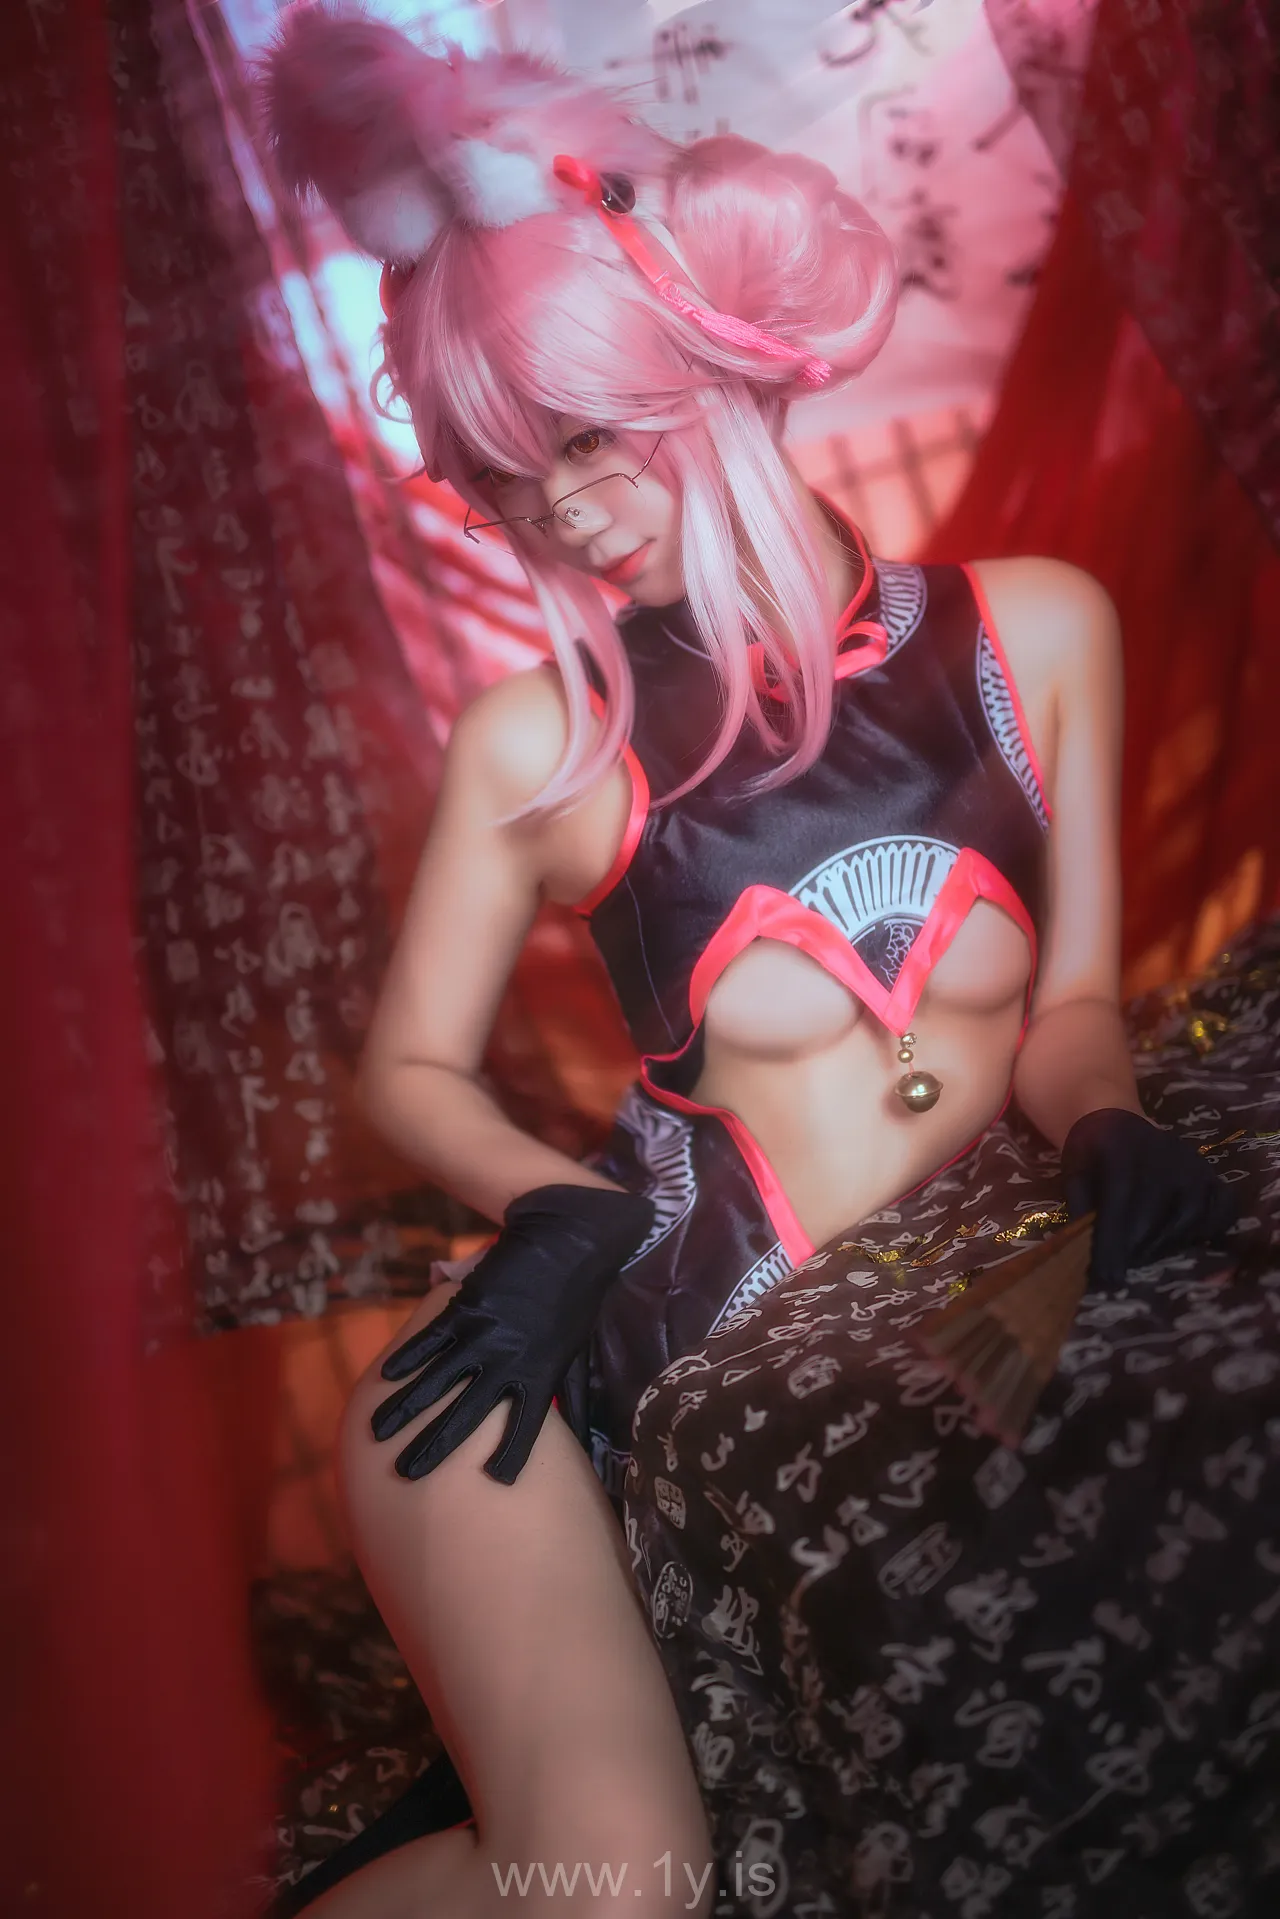 Coser@黑川 NO.022 Knockout Asian Model 杀阶旗袍柯杨斯卡娅